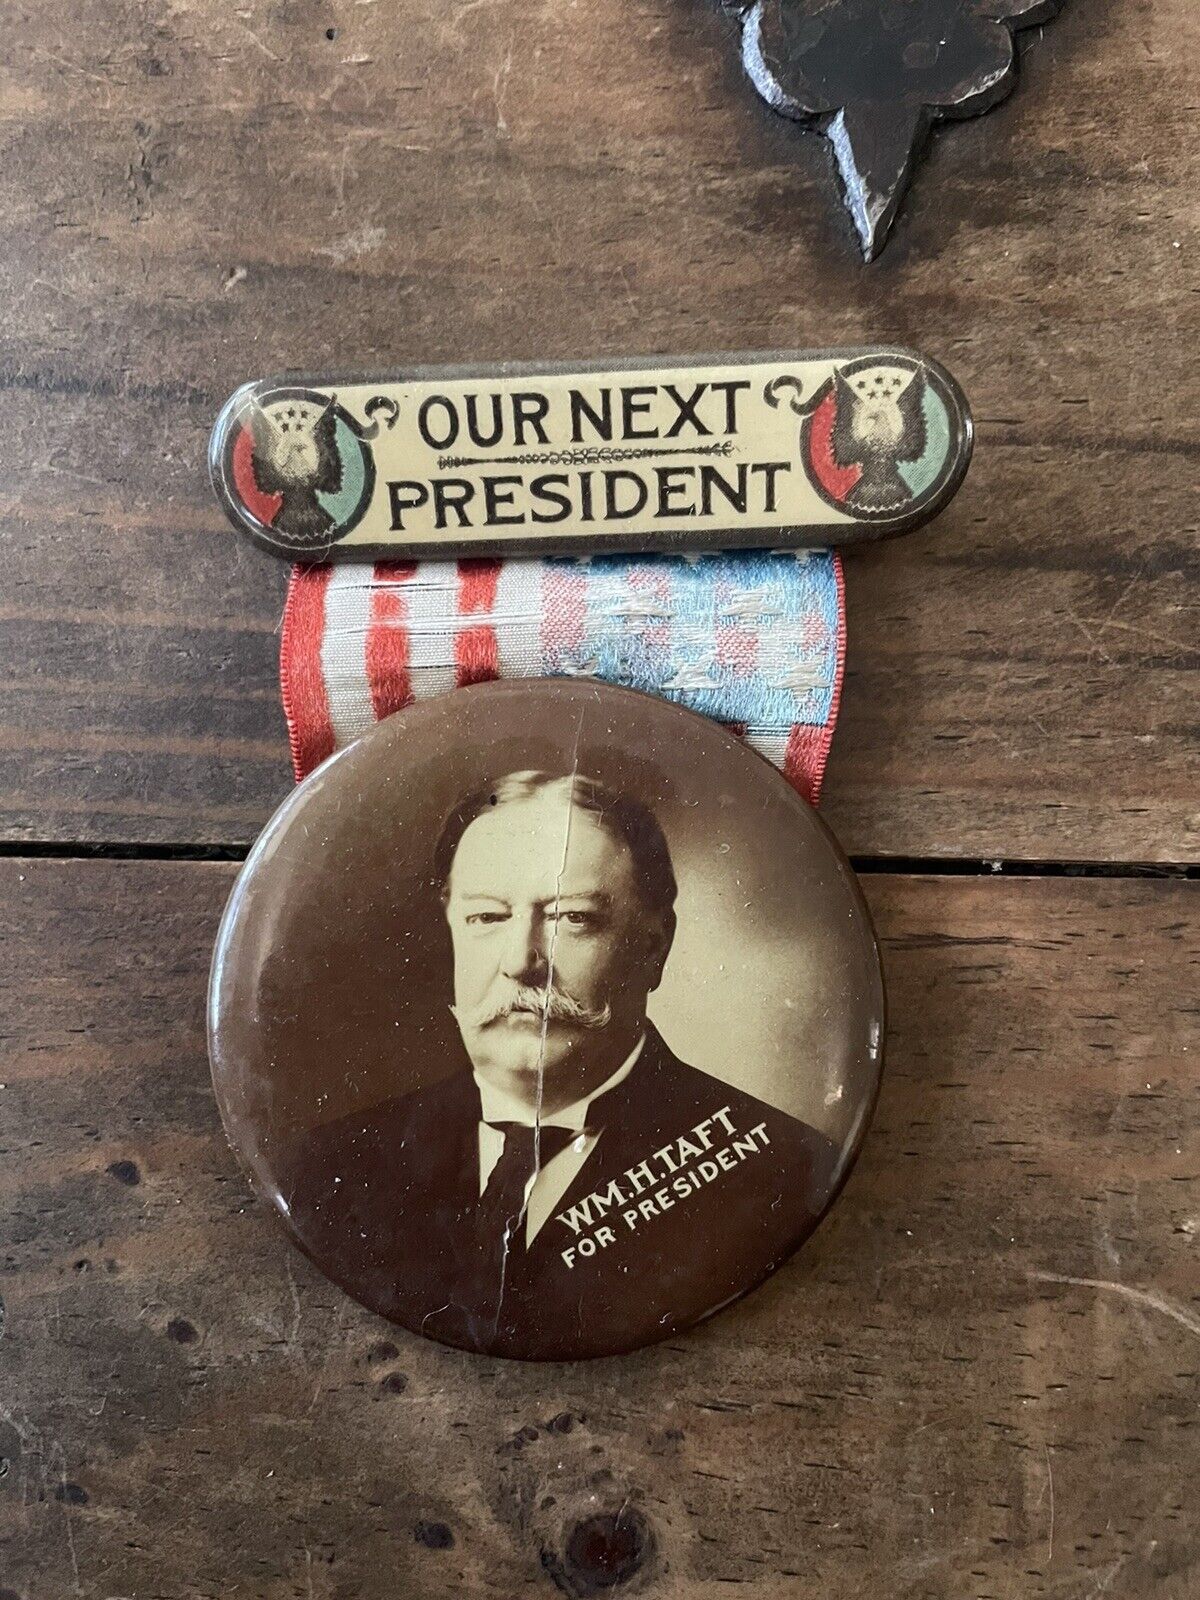 extremely Rare 1908 William H Taft Campaign Pinback Button ￼”our next president”